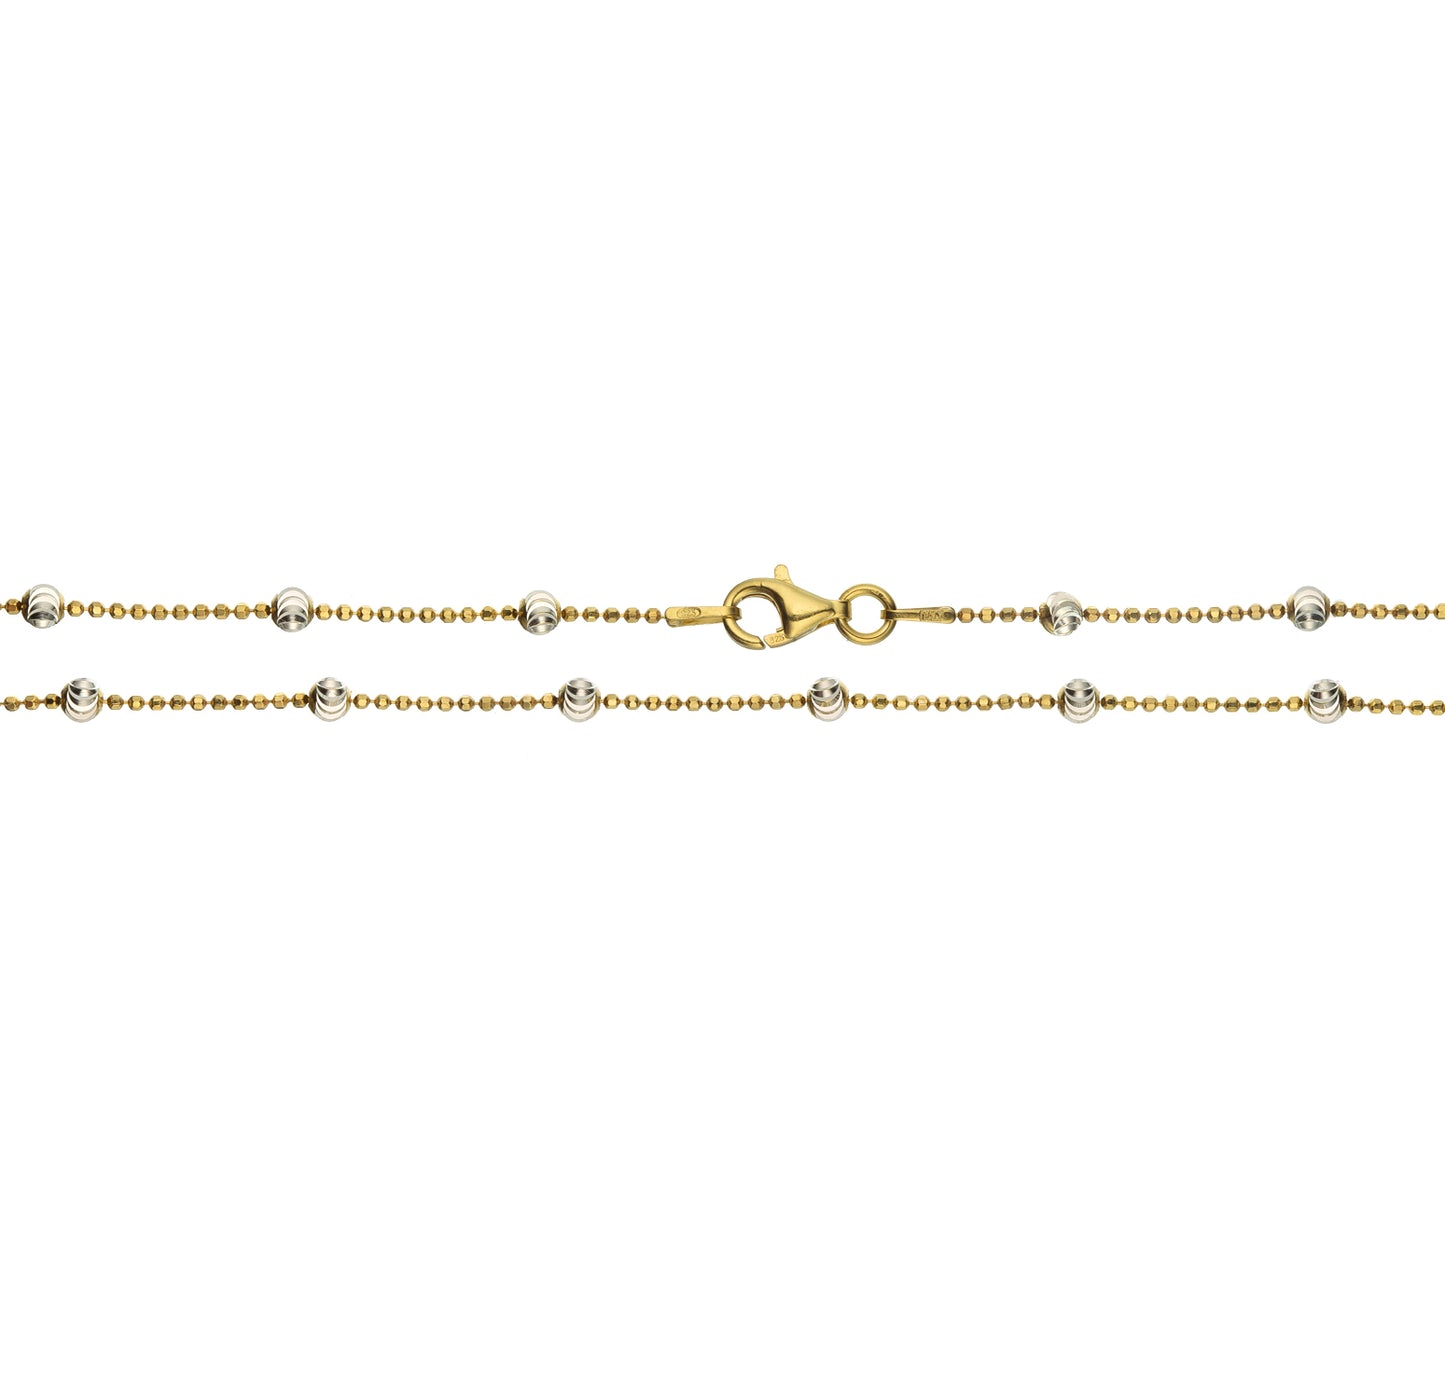 18K Gold over Sterling Silver 3mm Two Tone Bead Station Necklace | 16"-20"